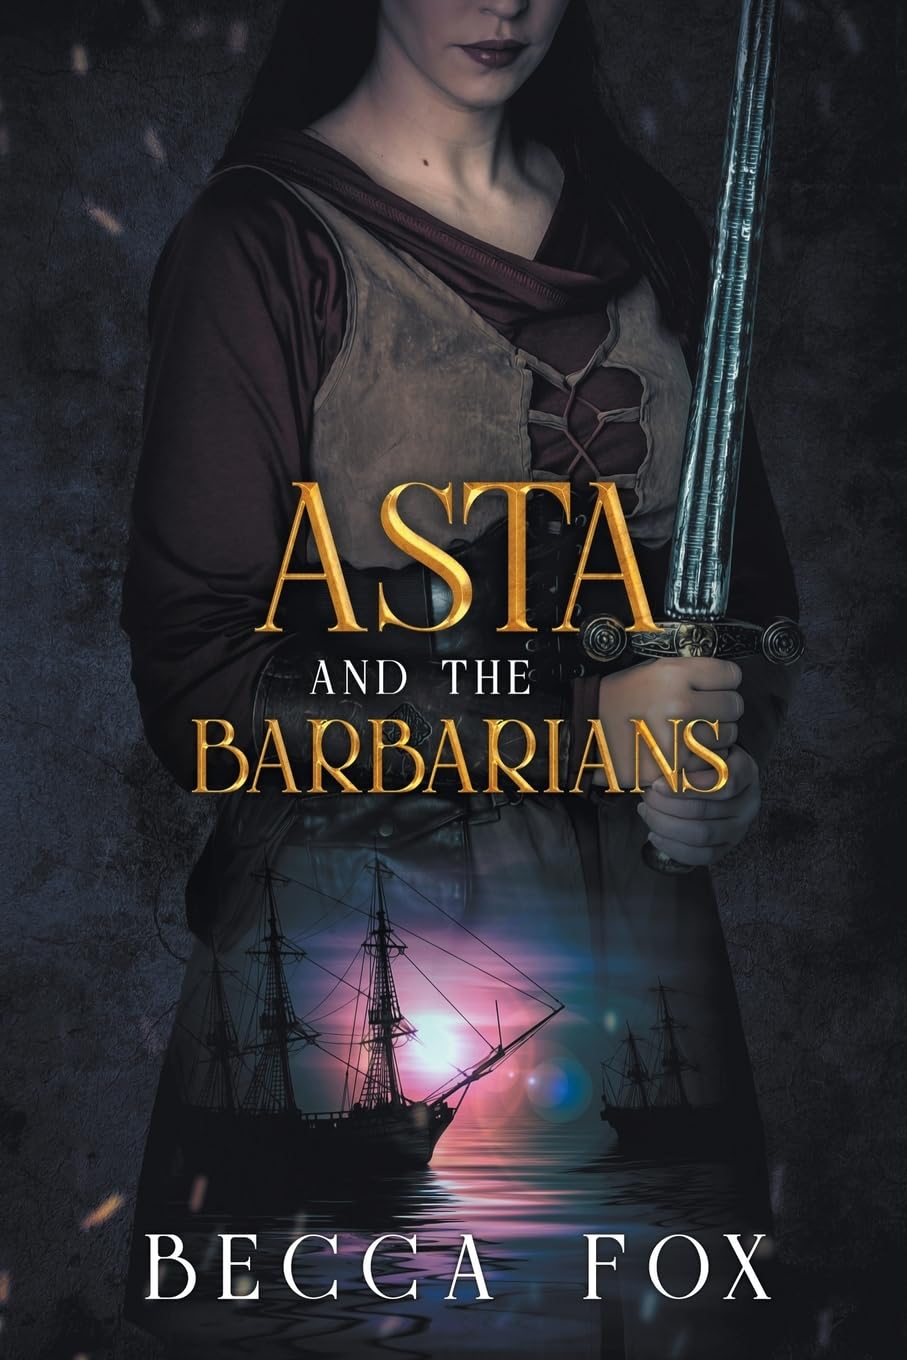 Asta and the Barbarians